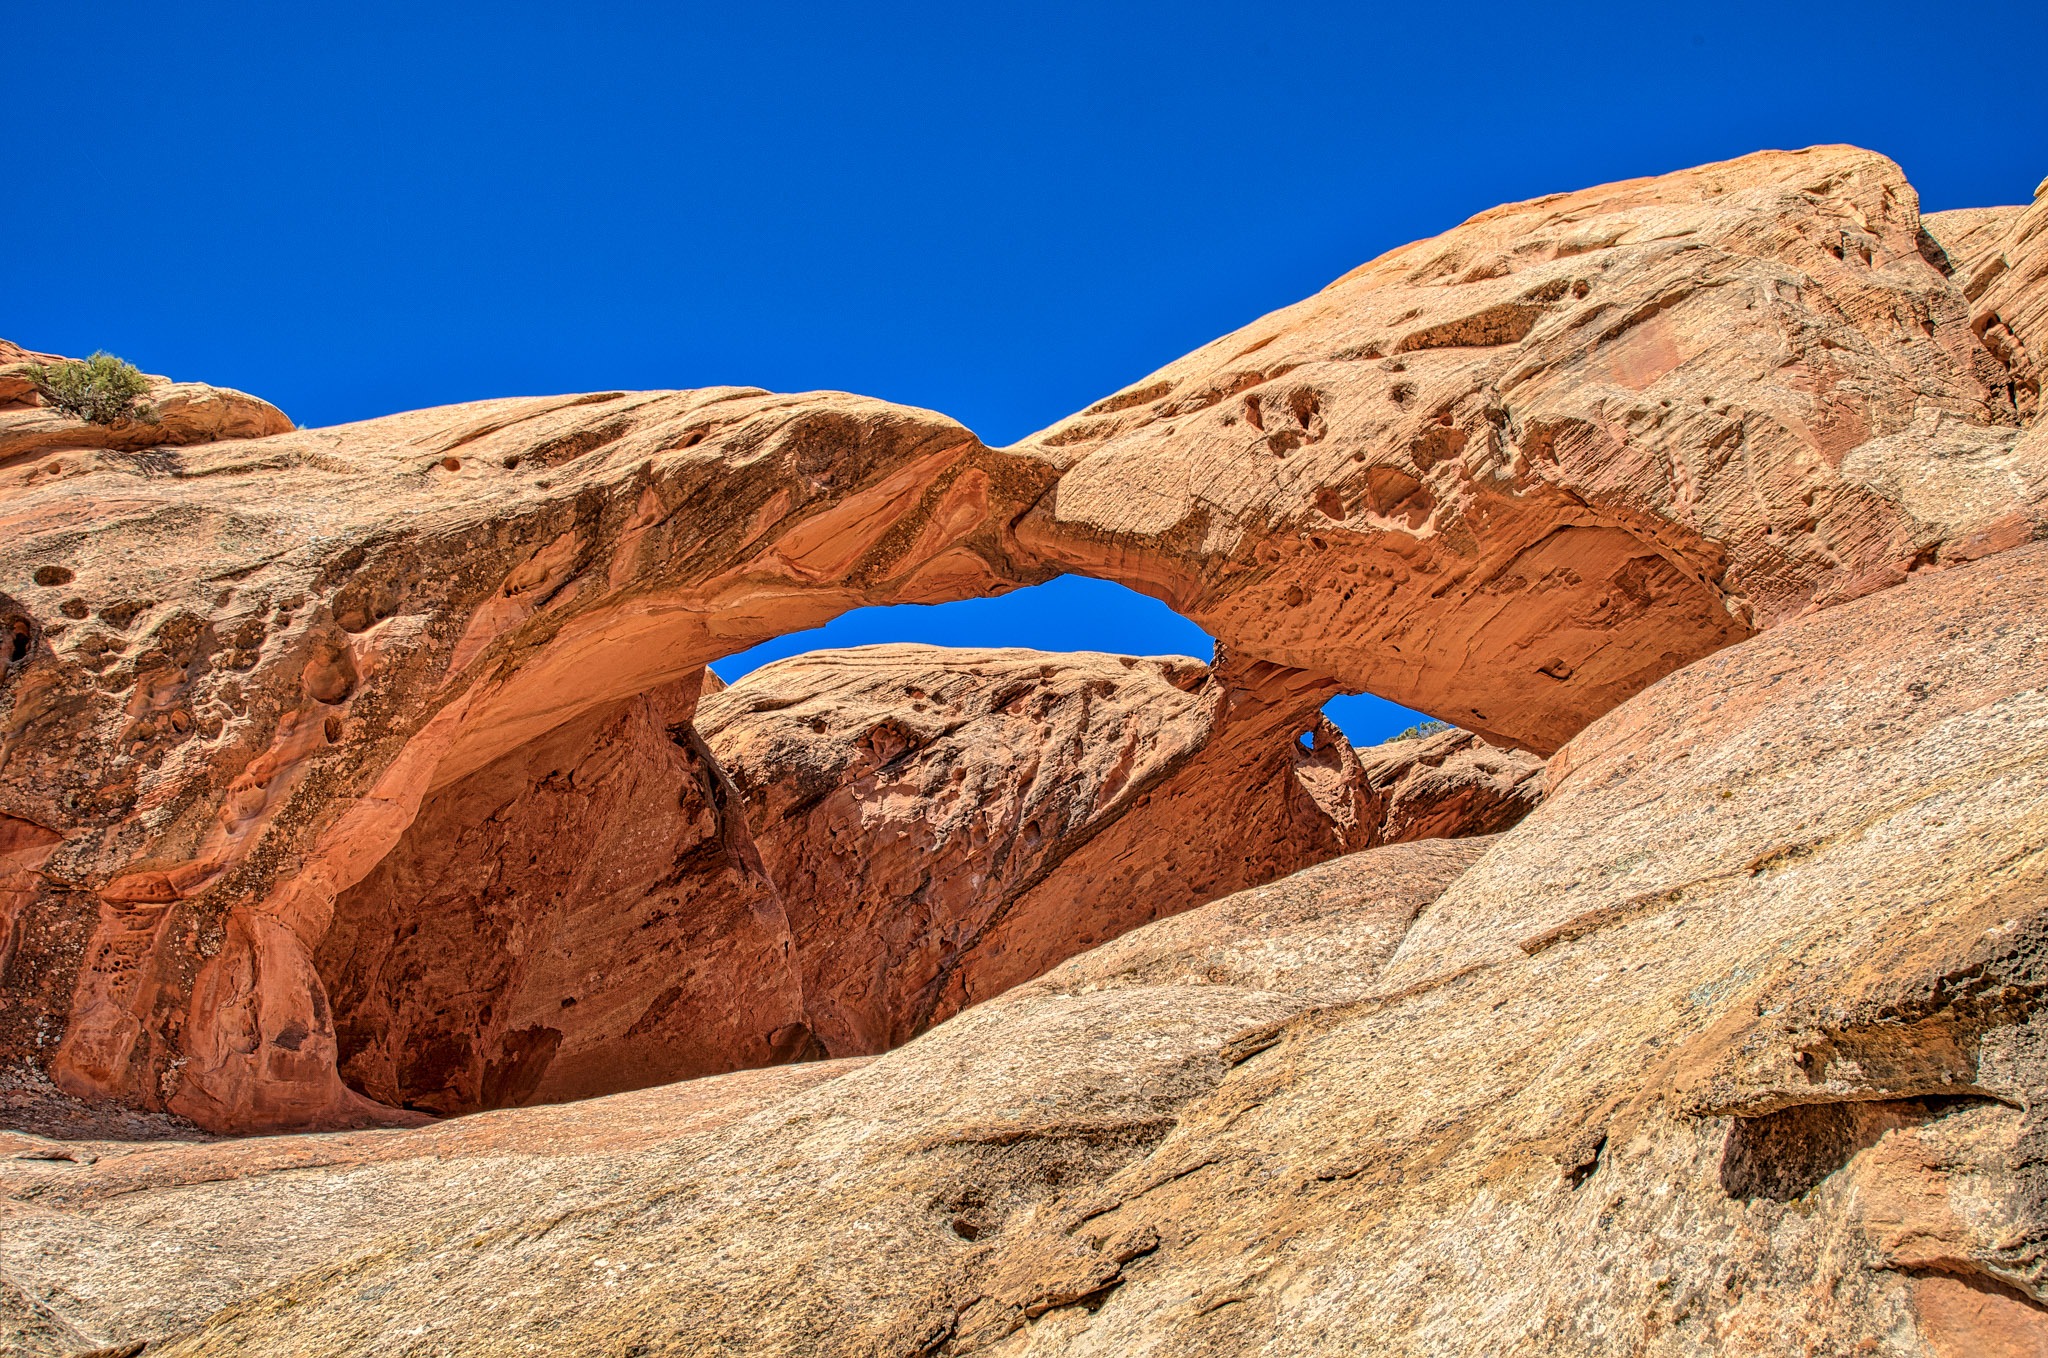 This double arch, sometimes called Trinity Arch, Beta Arch, or Twisted Muley Arch is visible on the west side of Upper Muley Twist Canyon Road, off the Burr Trail in Capitol Reef National Park, Utah.